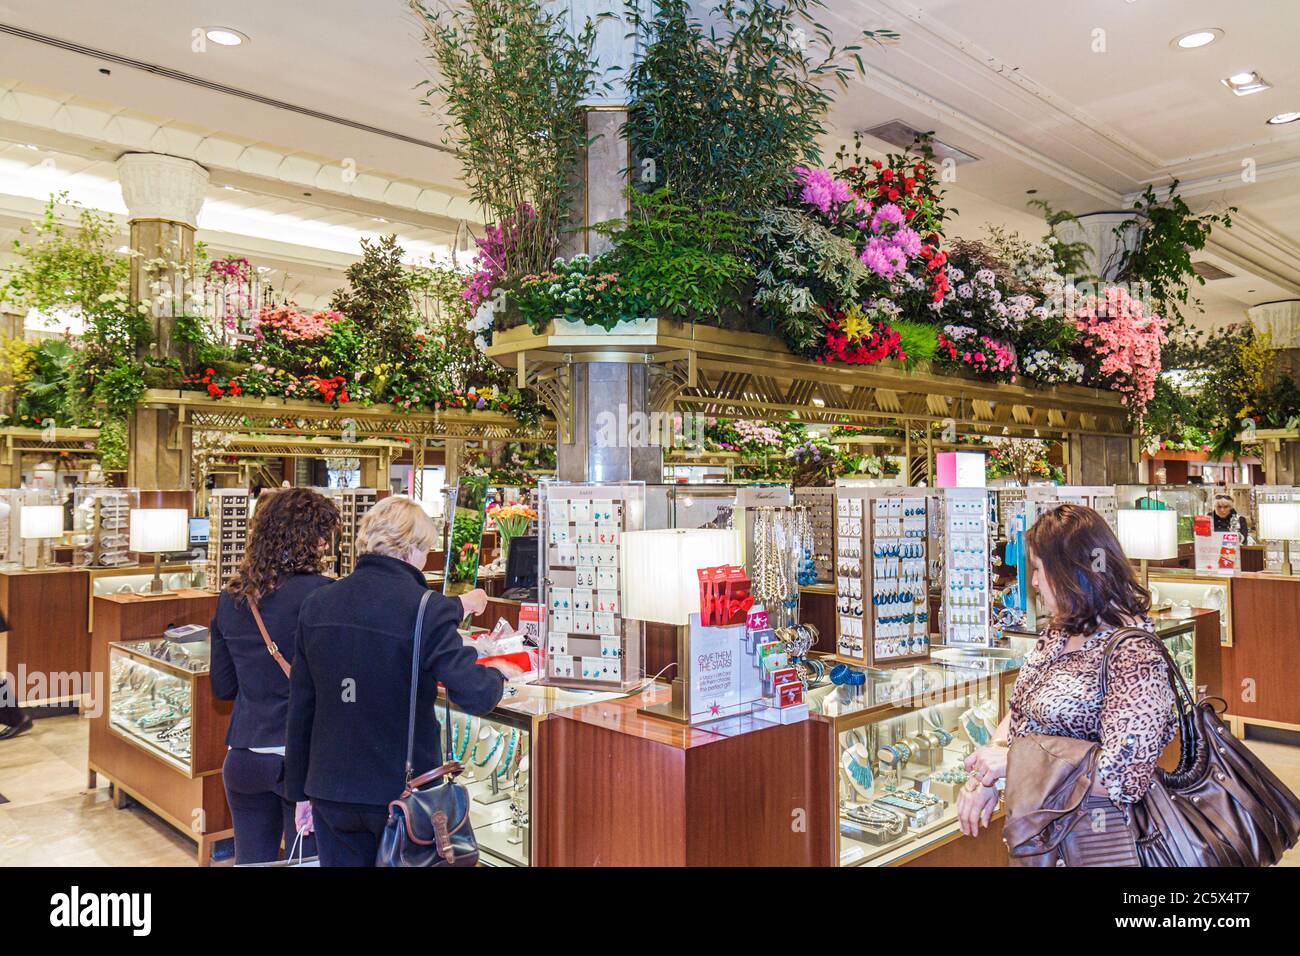 New York City,NYC NY Manhattan,Midtown,34th Street,Macy's,retail chain,Herald Square,department store,Flower Show,shopping shopper shoppers shop shops Stock Photo